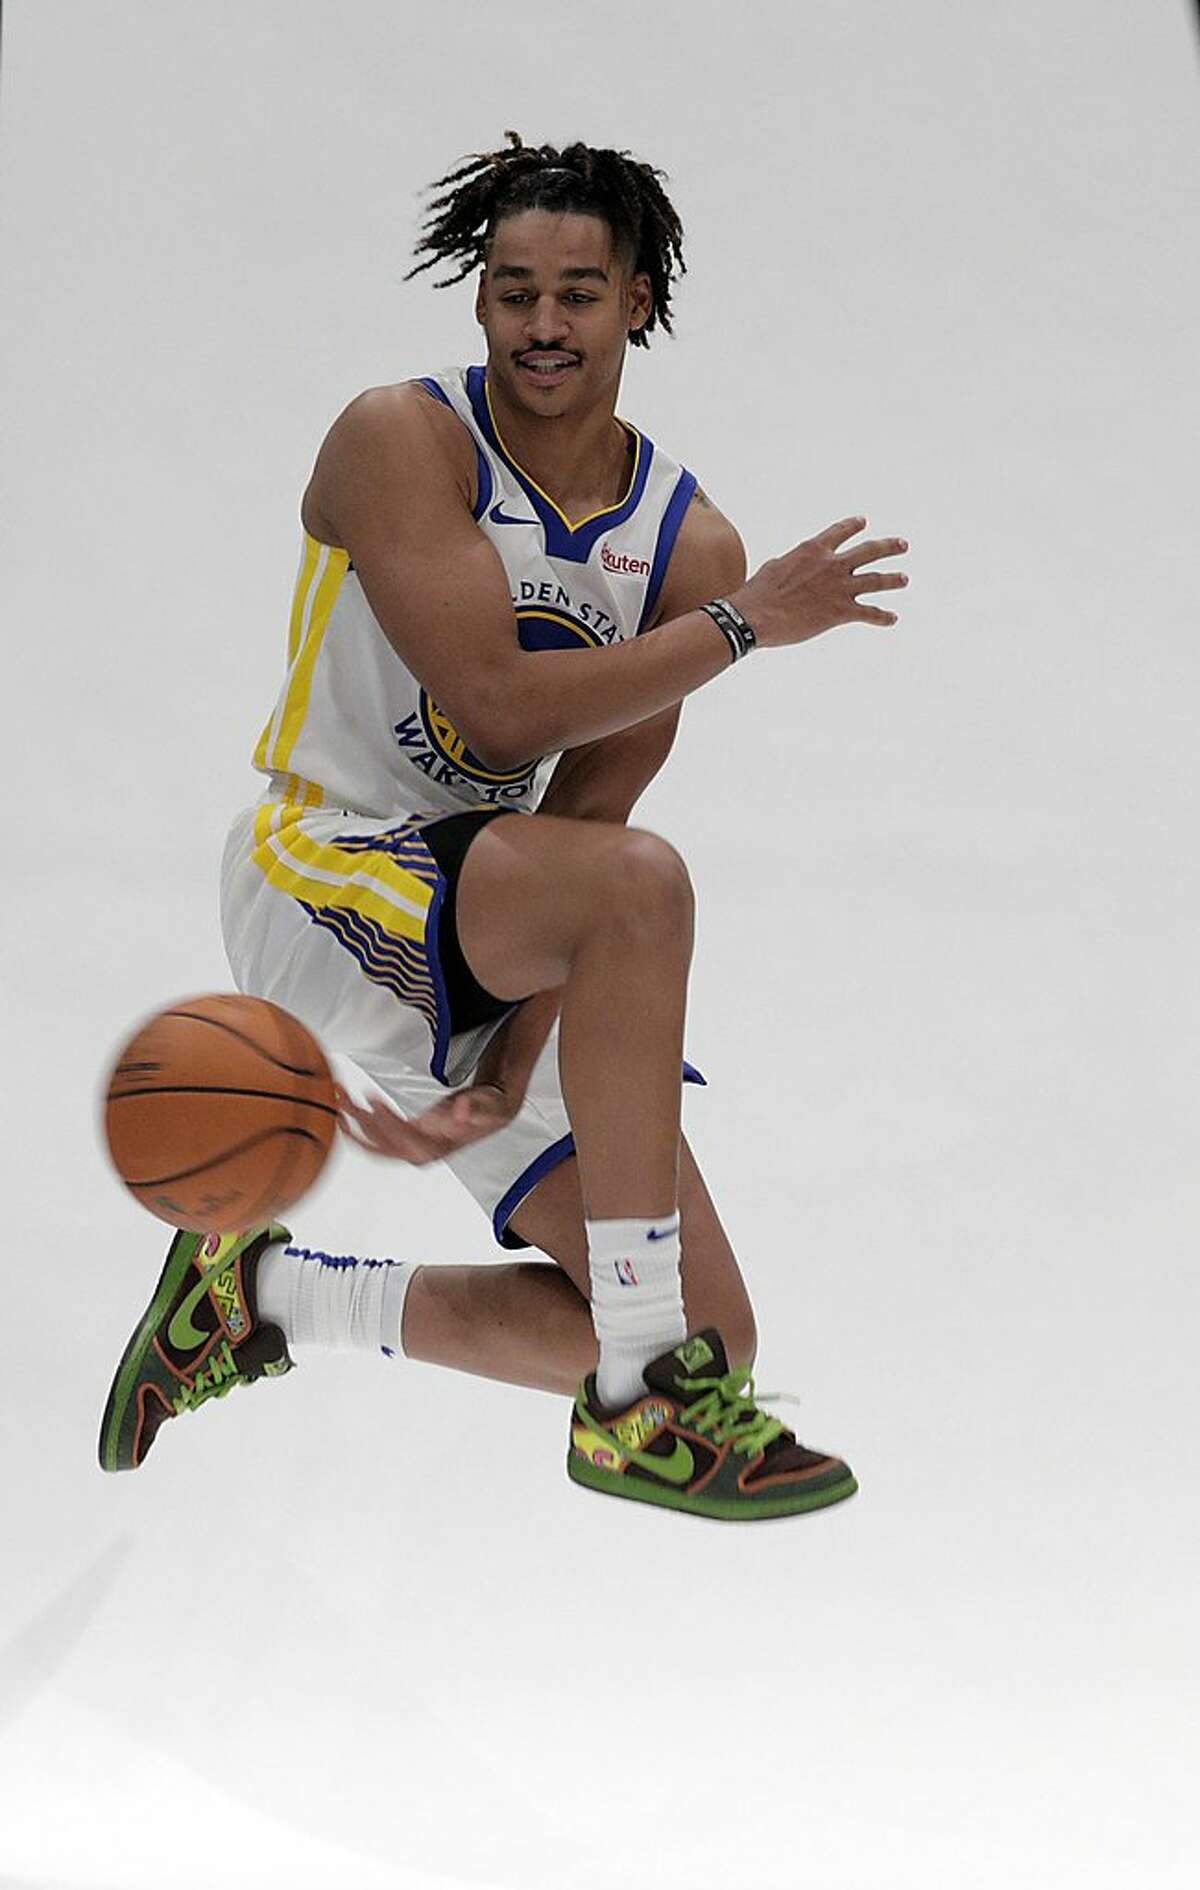 Jordan Poole (3) passes the ball between his legs for a portrait during media day for the Golden State Warriors at Chase Arena in San Francisco, Calif., on Monday, September 30, 2019.